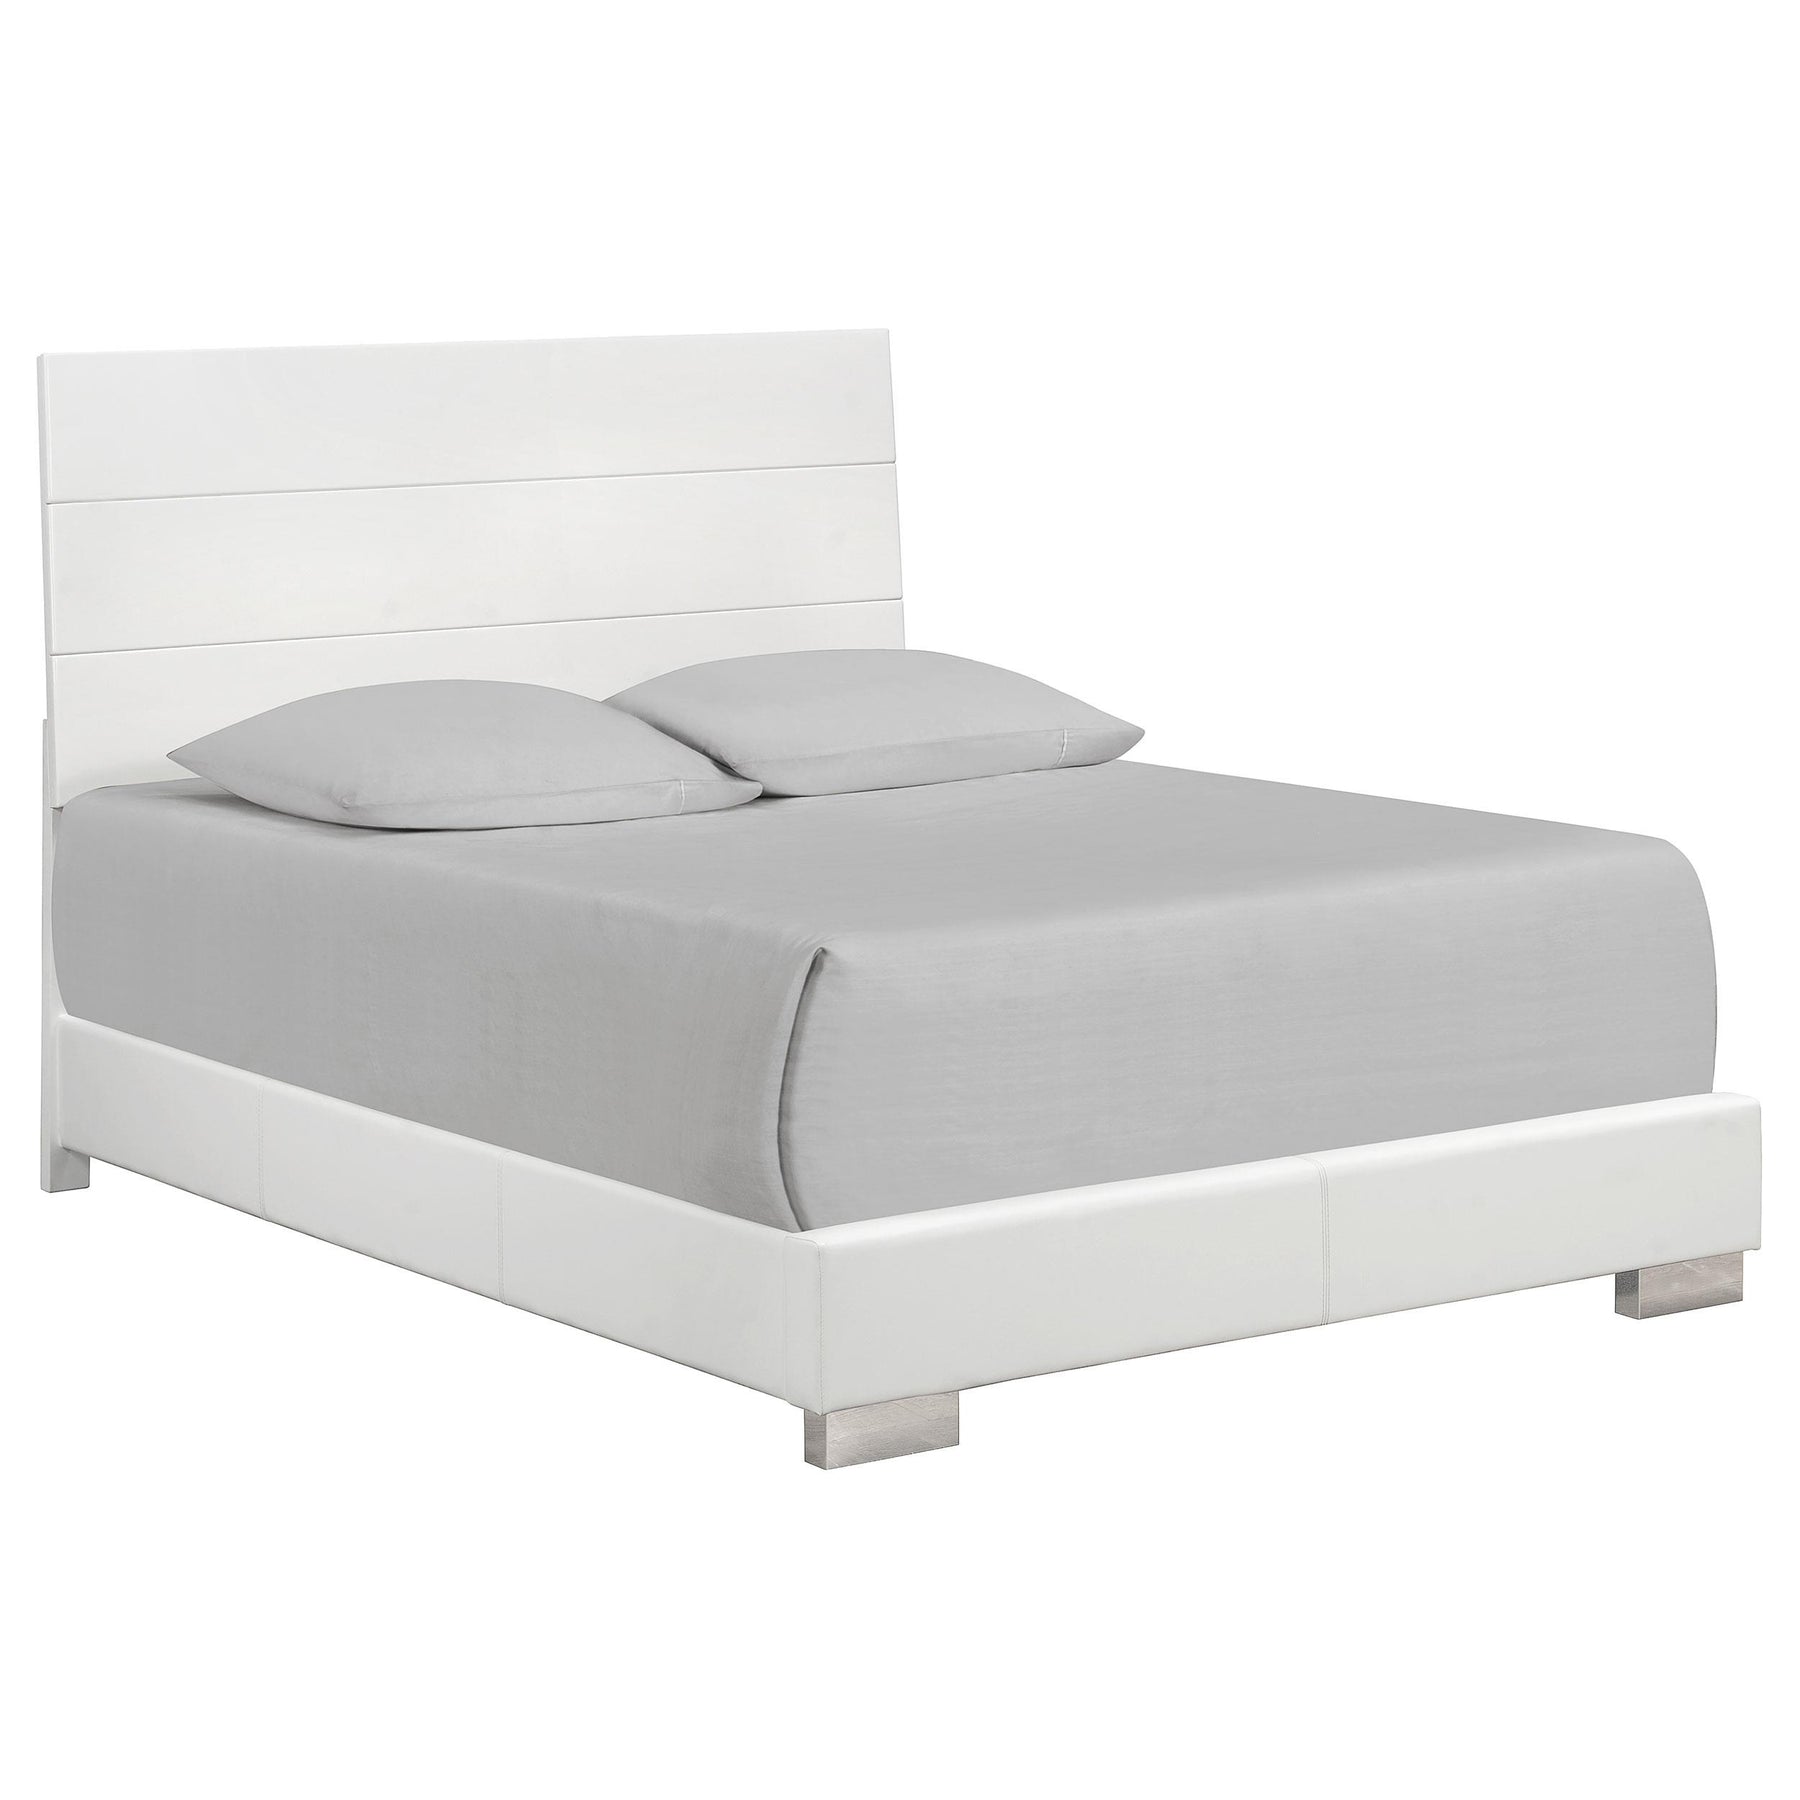 Felicity Eastern King Panel Bed Glossy White Felicity Eastern King Panel Bed Glossy White Half Price Furniture